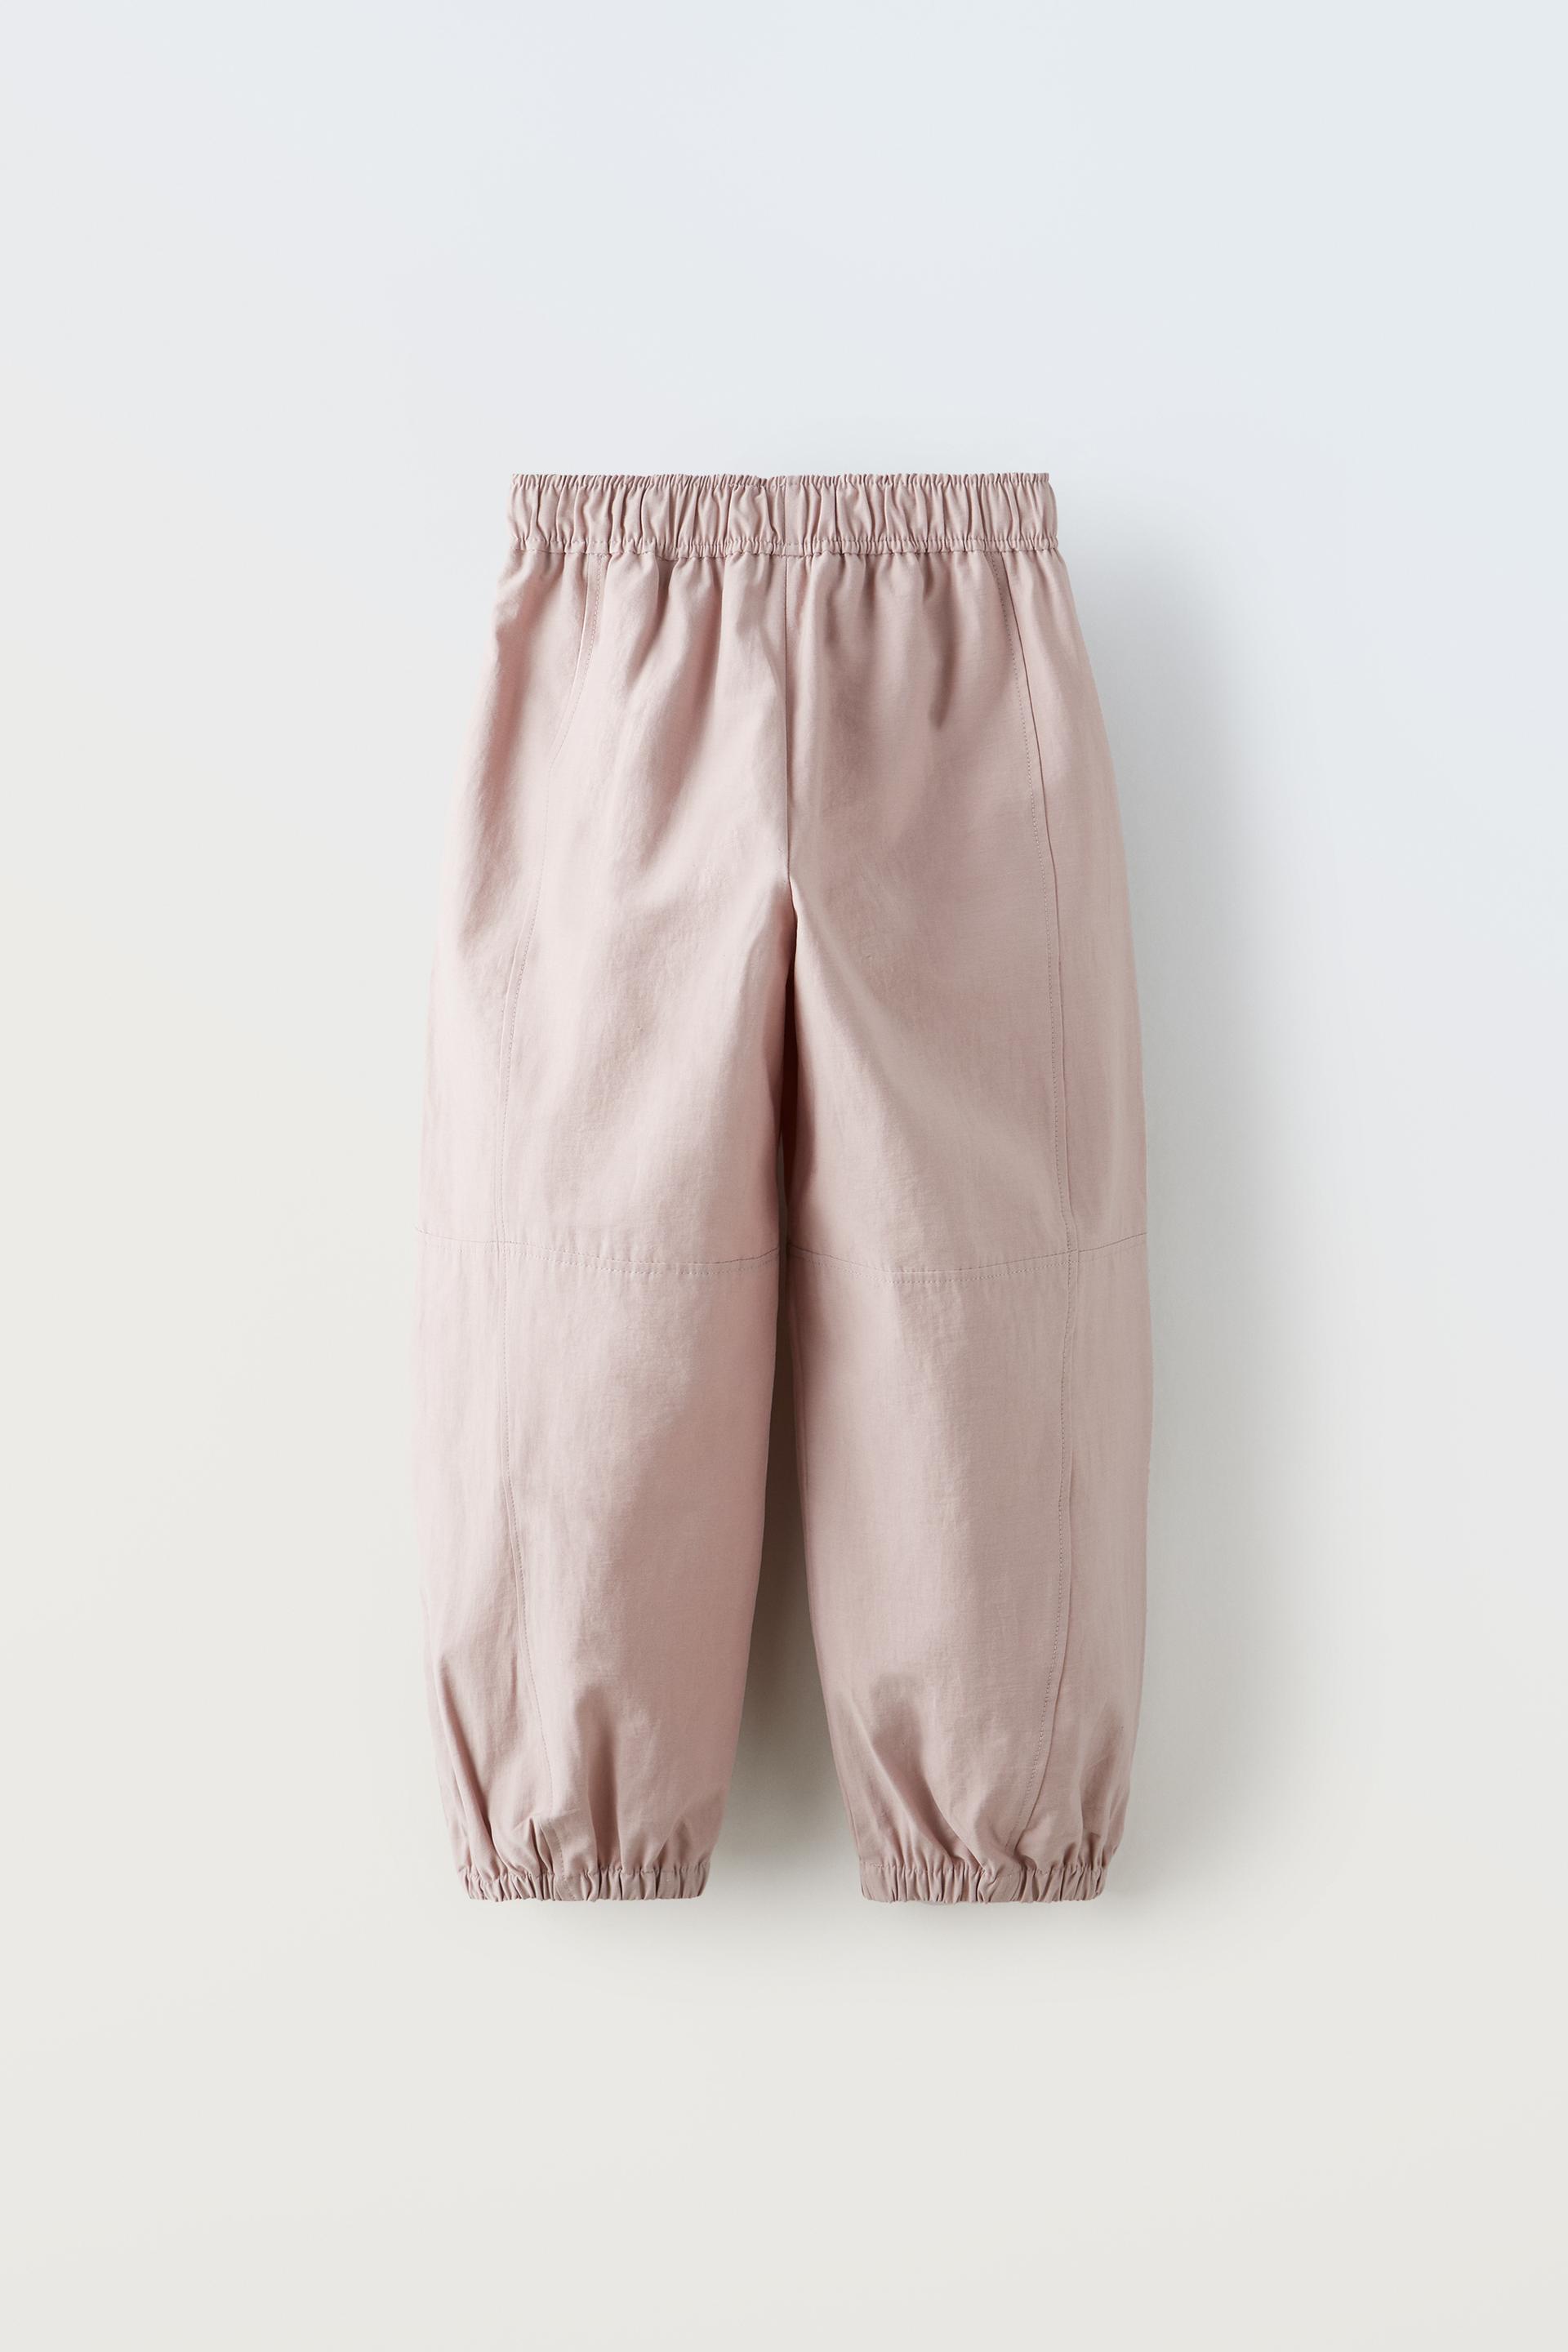 NWT Women's Light Pink Mimosa Parachute Dance Pants Size Small OR BEST  OFFER